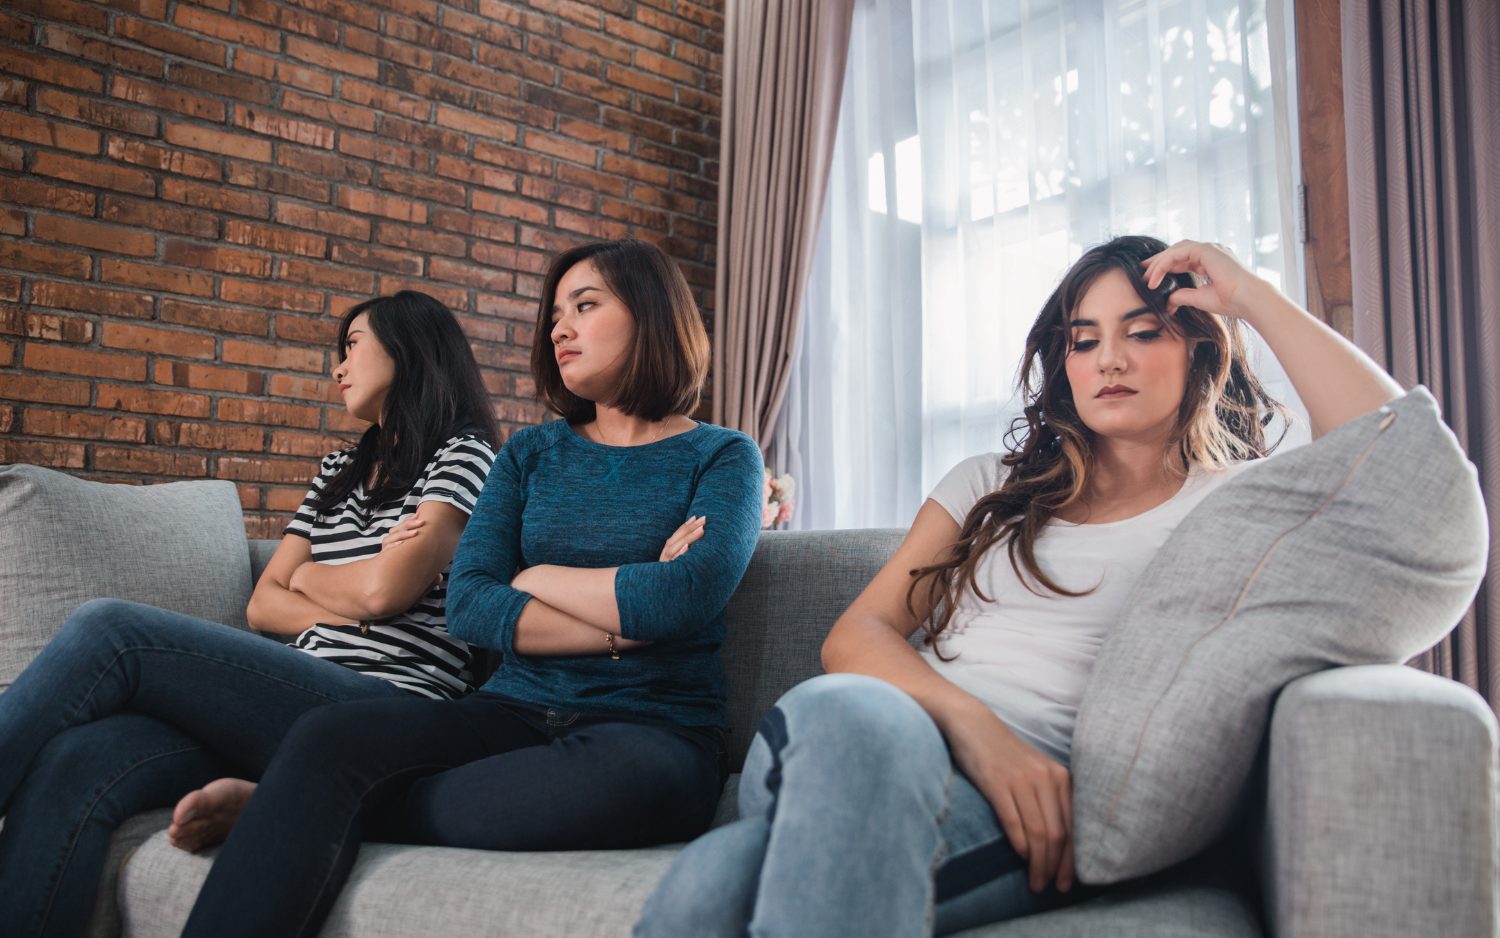 Group of three teenage girls sitting on a couch looking unhappy two sitting closer together one sitting farther away